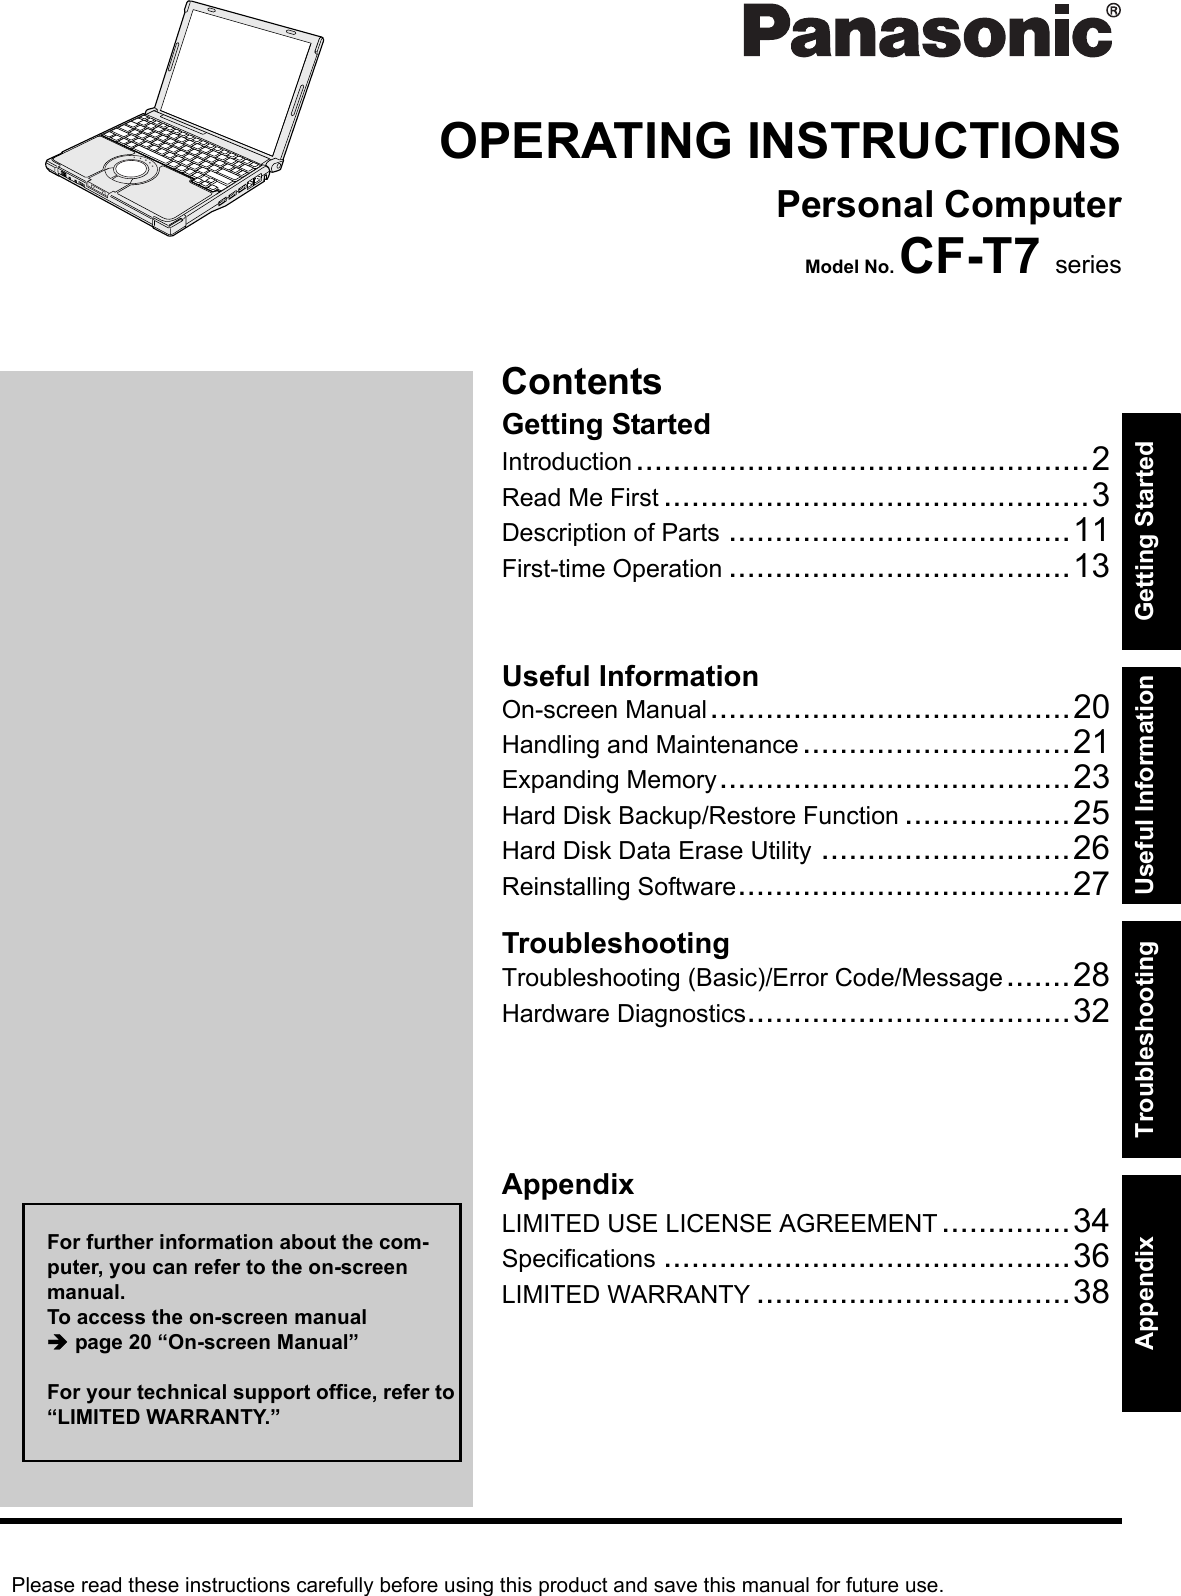 Please read these instructions carefully before using this product and save this manual for future use.ContentsGetting StartedUseful InformationTroubleshootingGetting StartedUseful InformationTroubleshootingAppendixAppendixOPERATING INSTRUCTIONSPersonal ComputerModel No. CF-T7 seriesIntroduction.................................................2Read Me First ..............................................3Description of Parts .....................................11First-time Operation .....................................13On-screen Manual.......................................20Handling and Maintenance.............................21Expanding Memory......................................23Hard Disk Backup/Restore Function ..................25Hard Disk Data Erase Utility ...........................26Reinstalling Software....................................27Troubleshooting (Basic)/Error Code/Message.......28Hardware Diagnostics...................................32LIMITED USE LICENSE AGREEMENT..............34Specifications ............................................36LIMITED WARRANTY ..................................38For further information about the com-puter, you can refer to the on-screen manual.To access the on-screen manual page 20 “On-screen Manual”For your technical support office, refer to “LIMITED WARRANTY.”